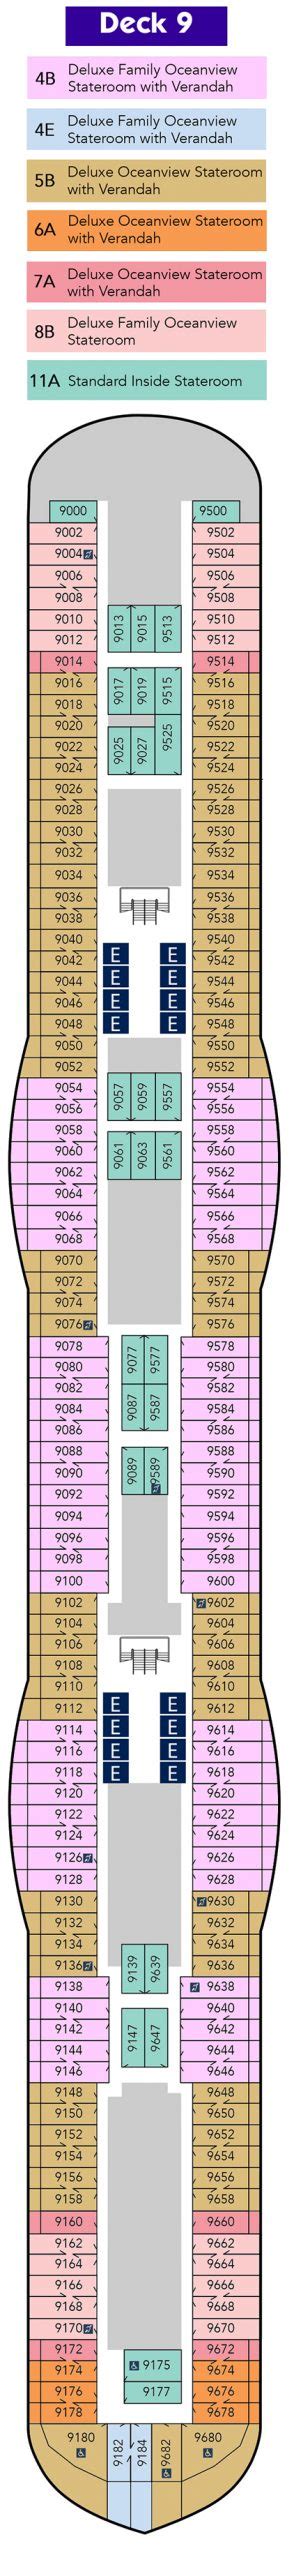 Deck Plans For Disney Cruise Line Ships View Or Download